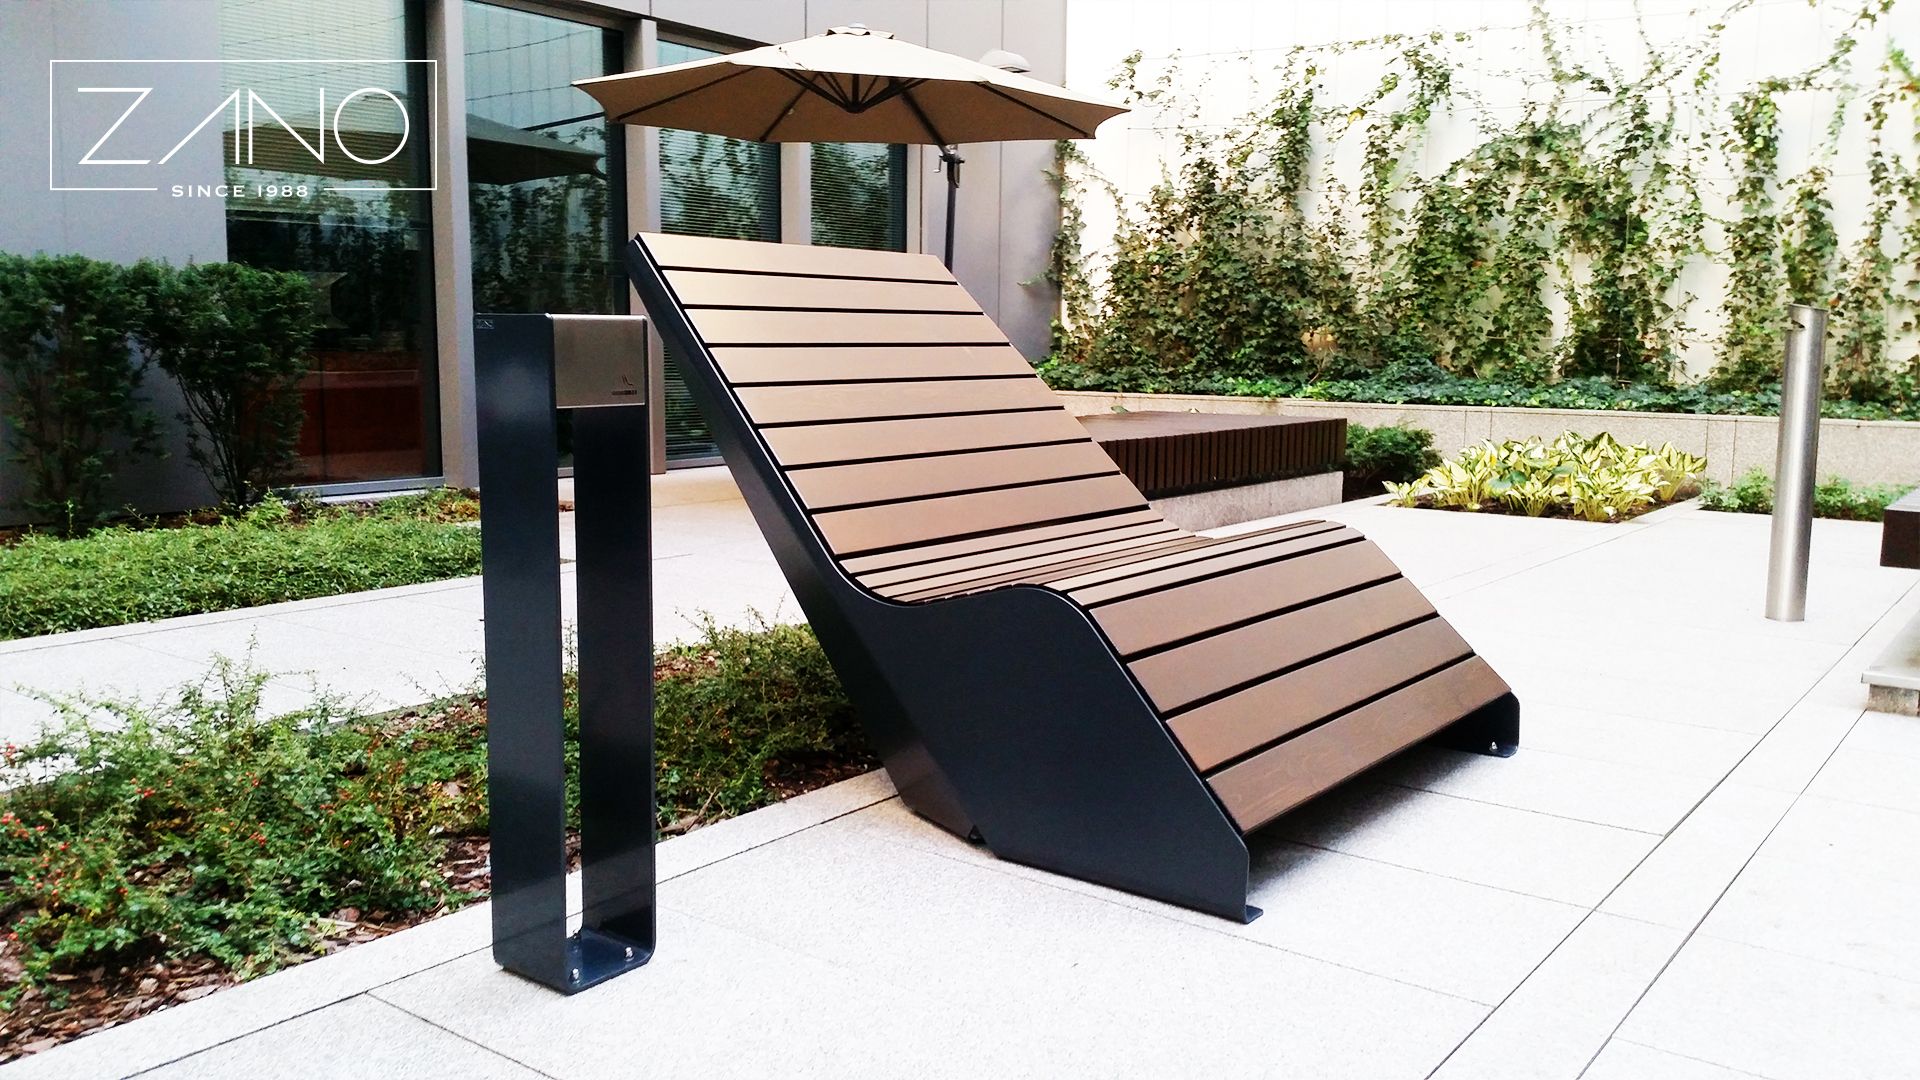 Innovative Duo lounger from ZANO Street Furniture